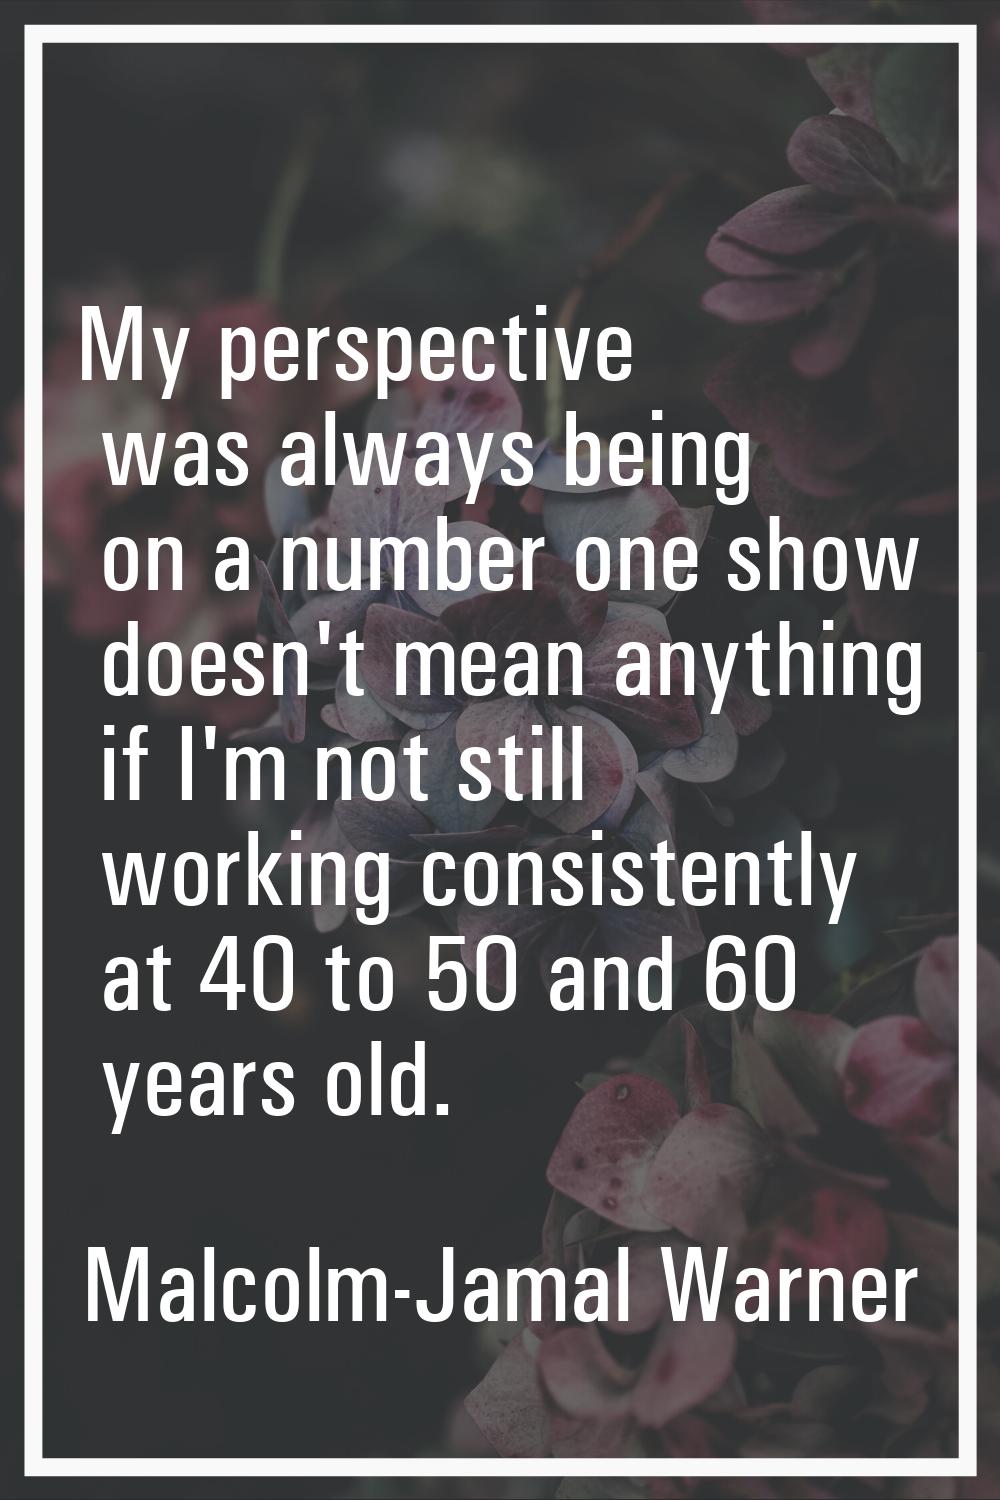 My perspective was always being on a number one show doesn't mean anything if I'm not still working